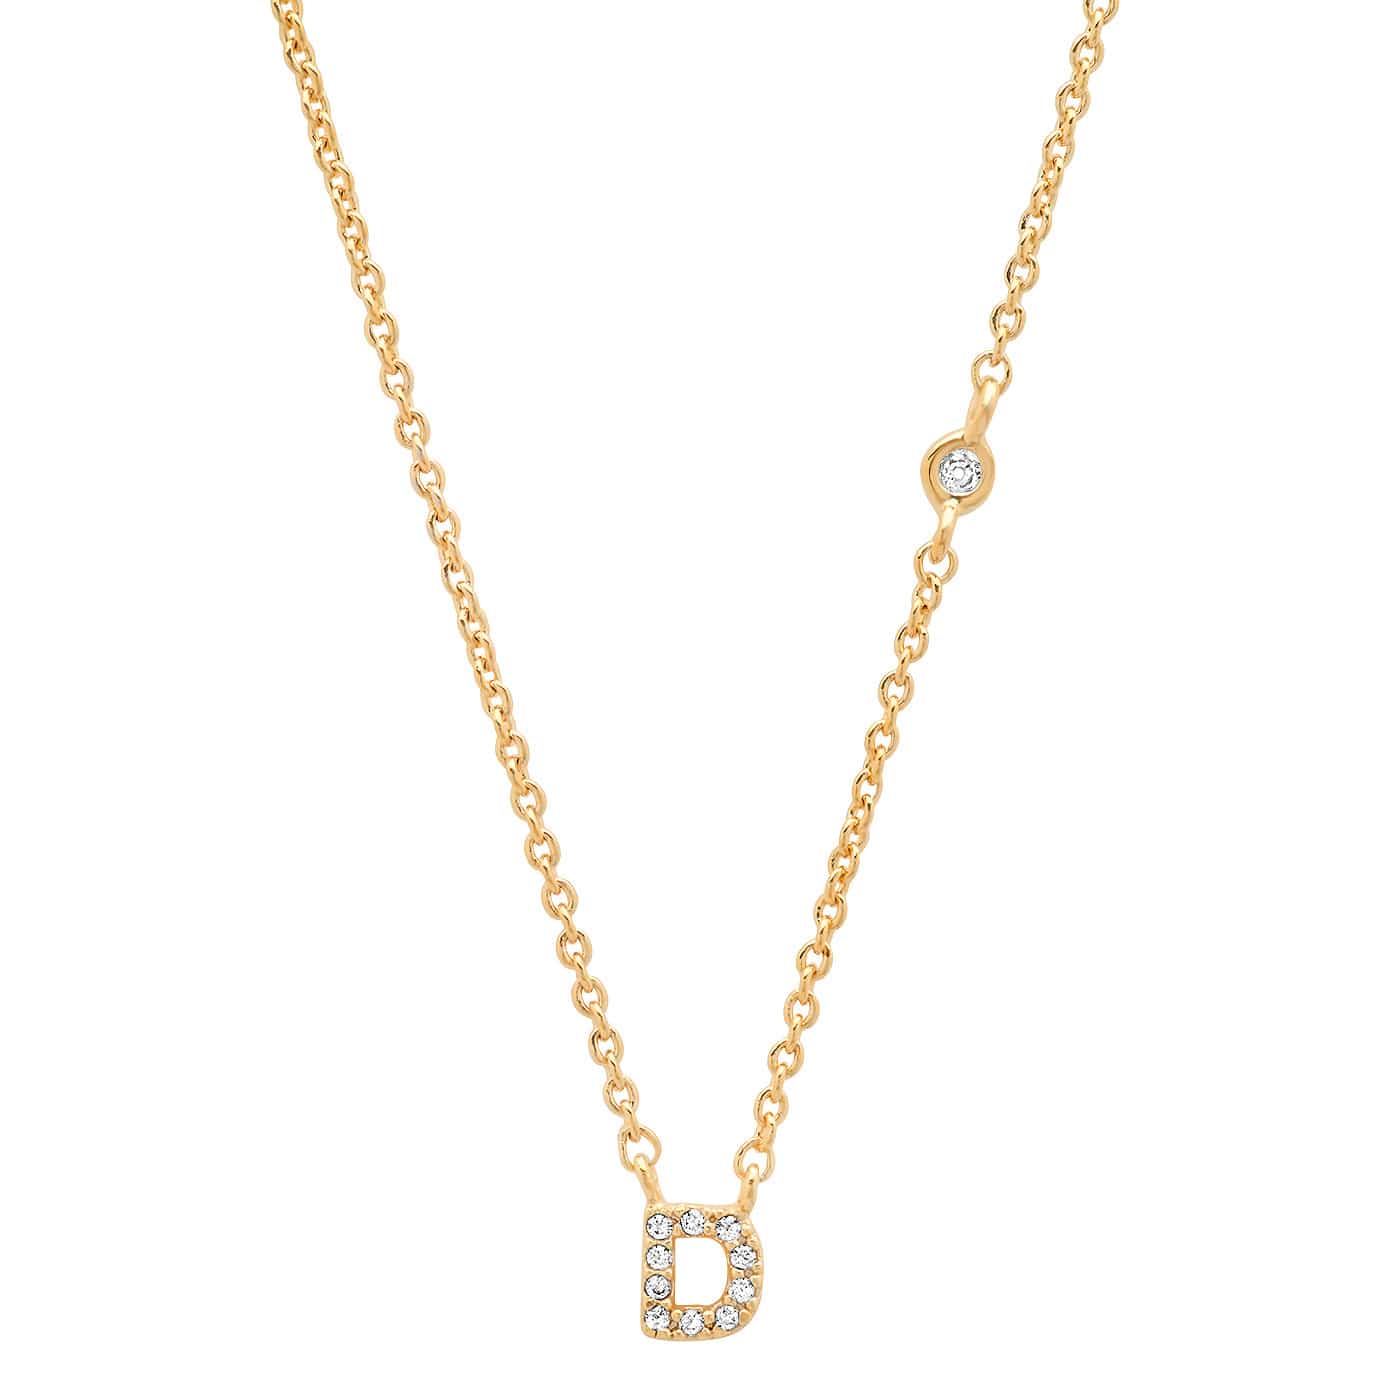 TAI JEWELRY Necklace Gold / D CZ Initial Necklace